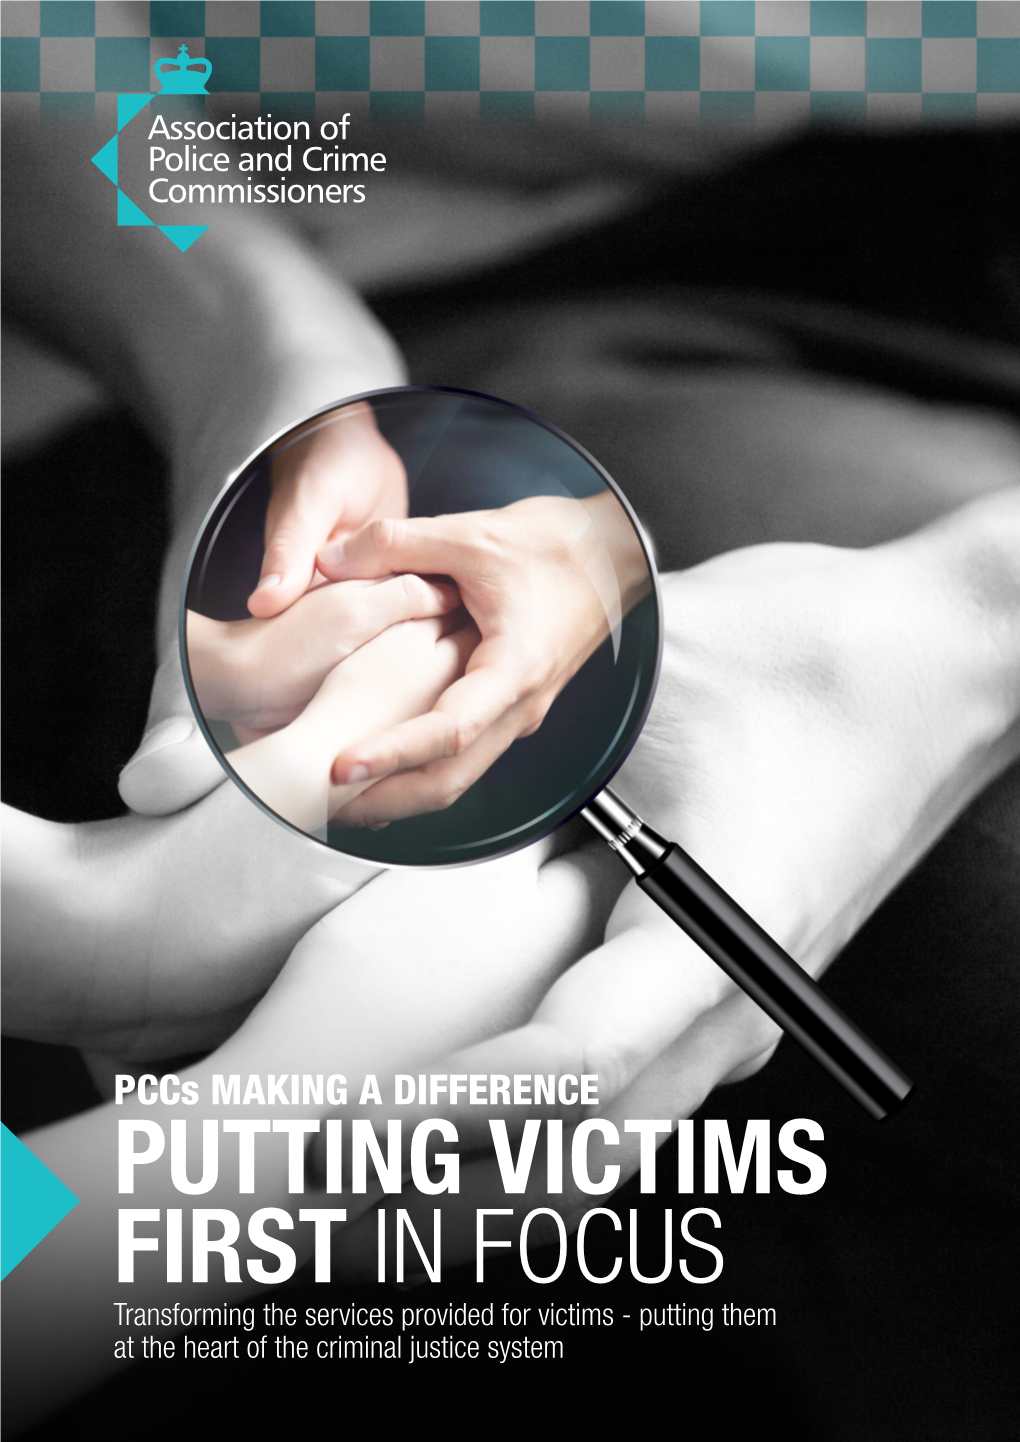 PUTTING VICTIMS FIRST in FOCUS Transforming the Services Provided for Victims - Putting Them at the Heart of the Criminal Justice System